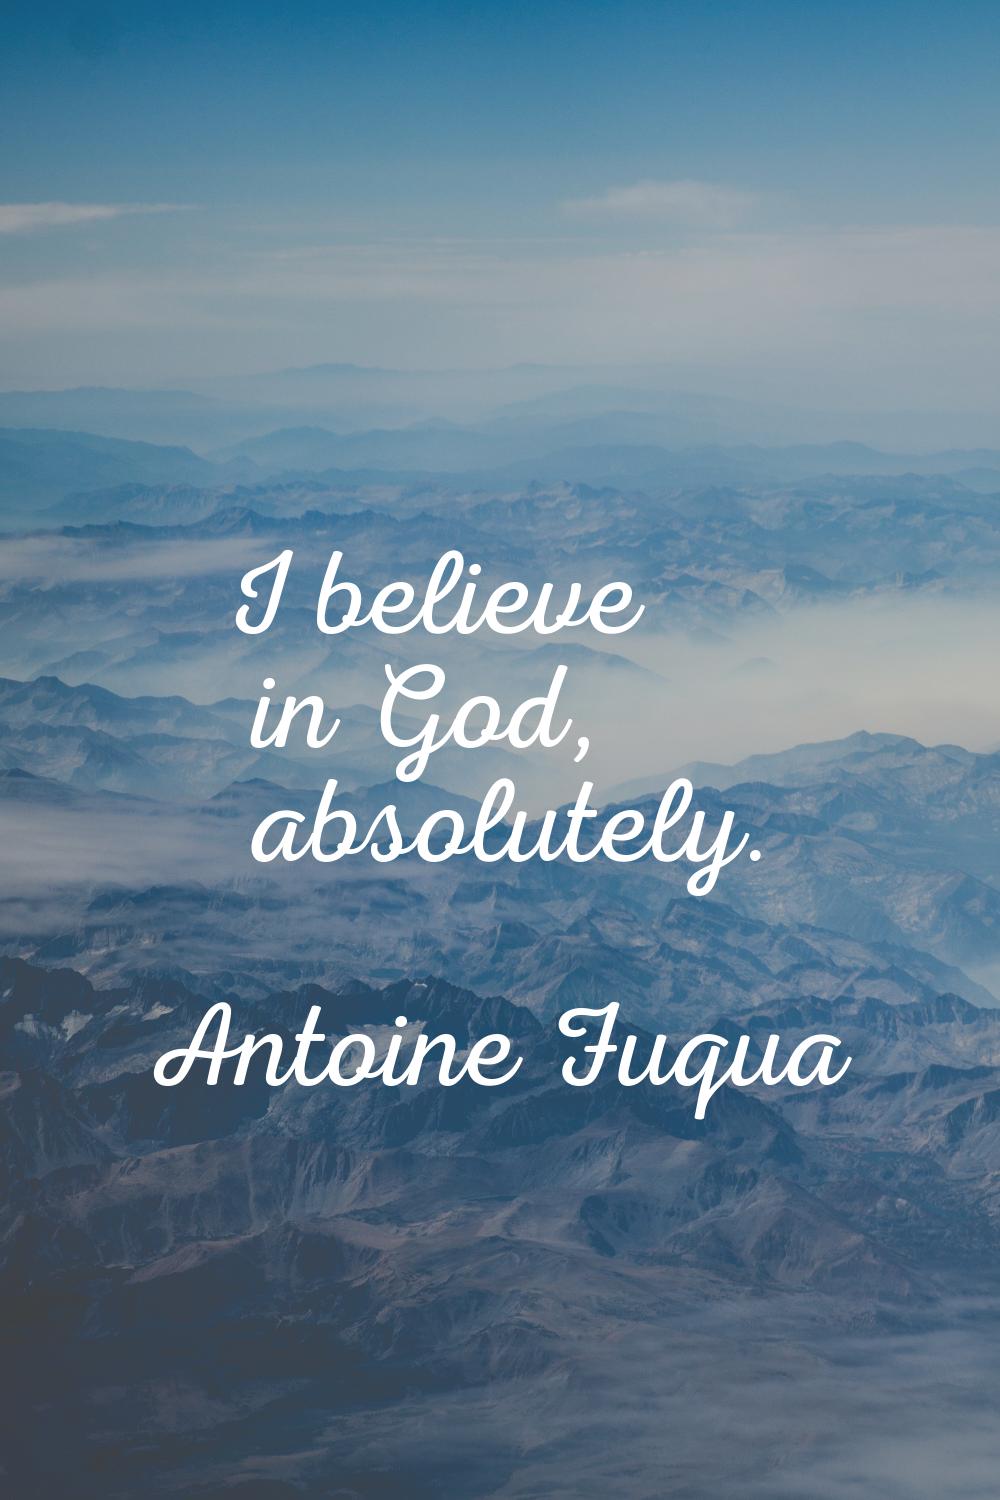 I believe in God, absolutely.